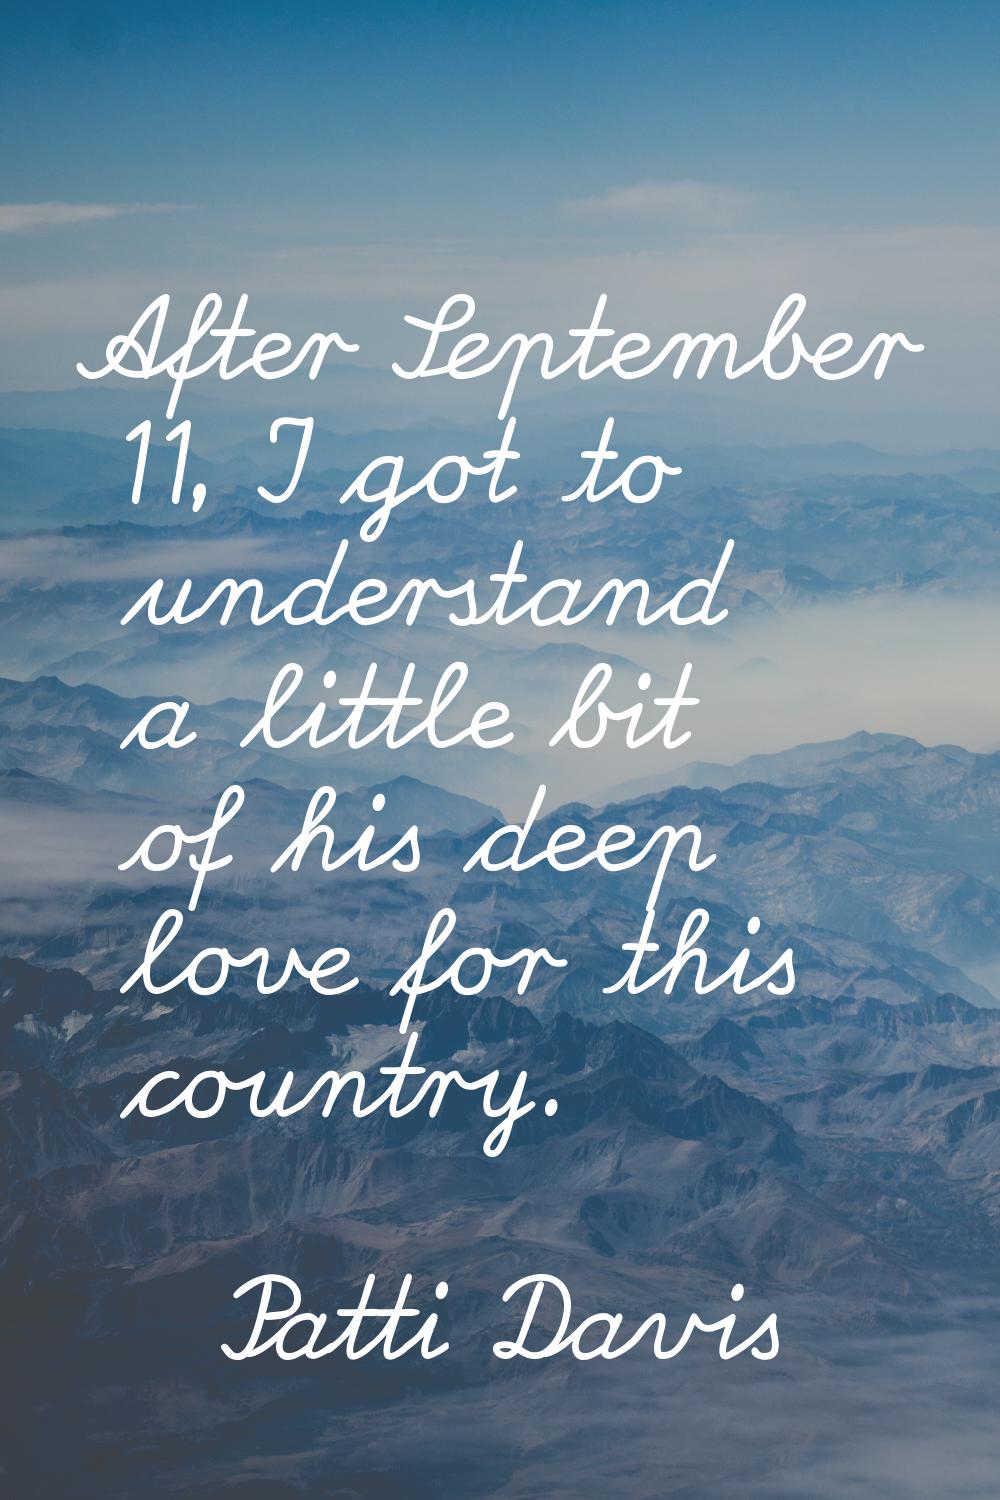 After September 11, I got to understand a little bit of his deep love for this country.